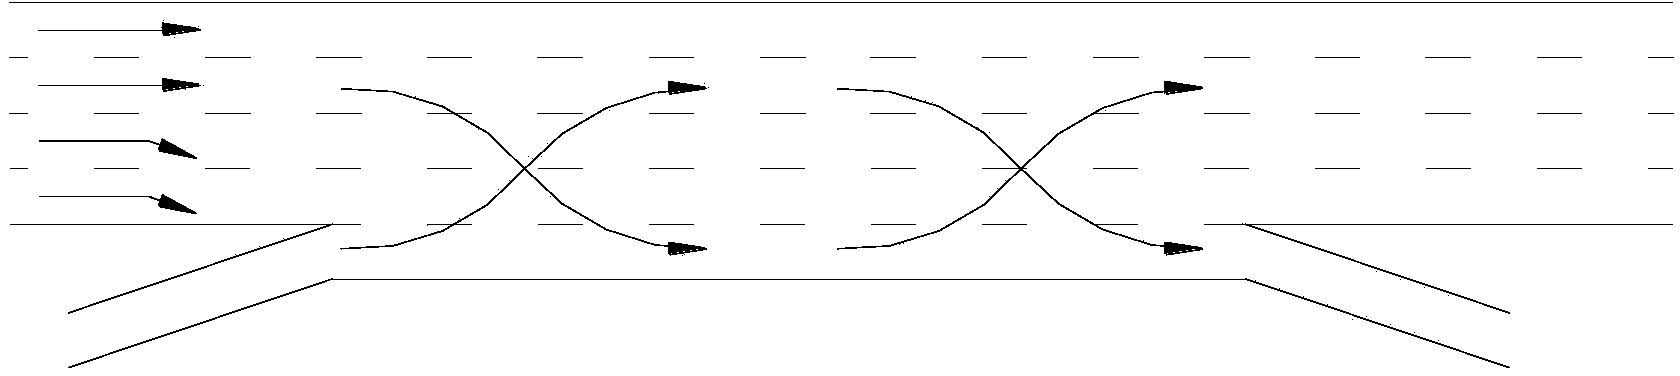 Lane dynamic partitioning control method for expressway intersection area